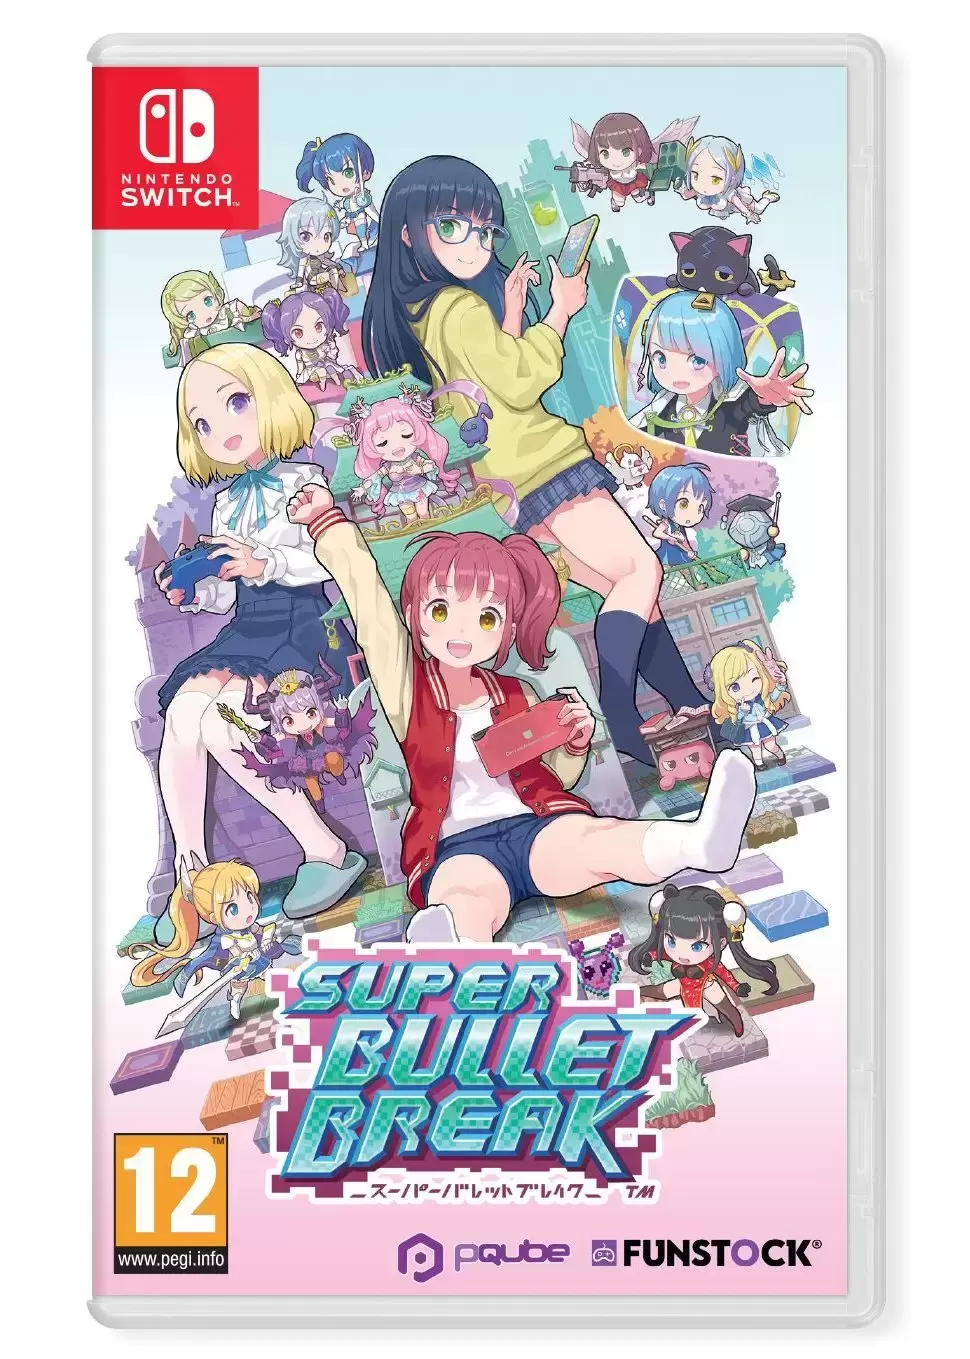 Nintendo Switch Games - Super Bullet Break - Day One Edition